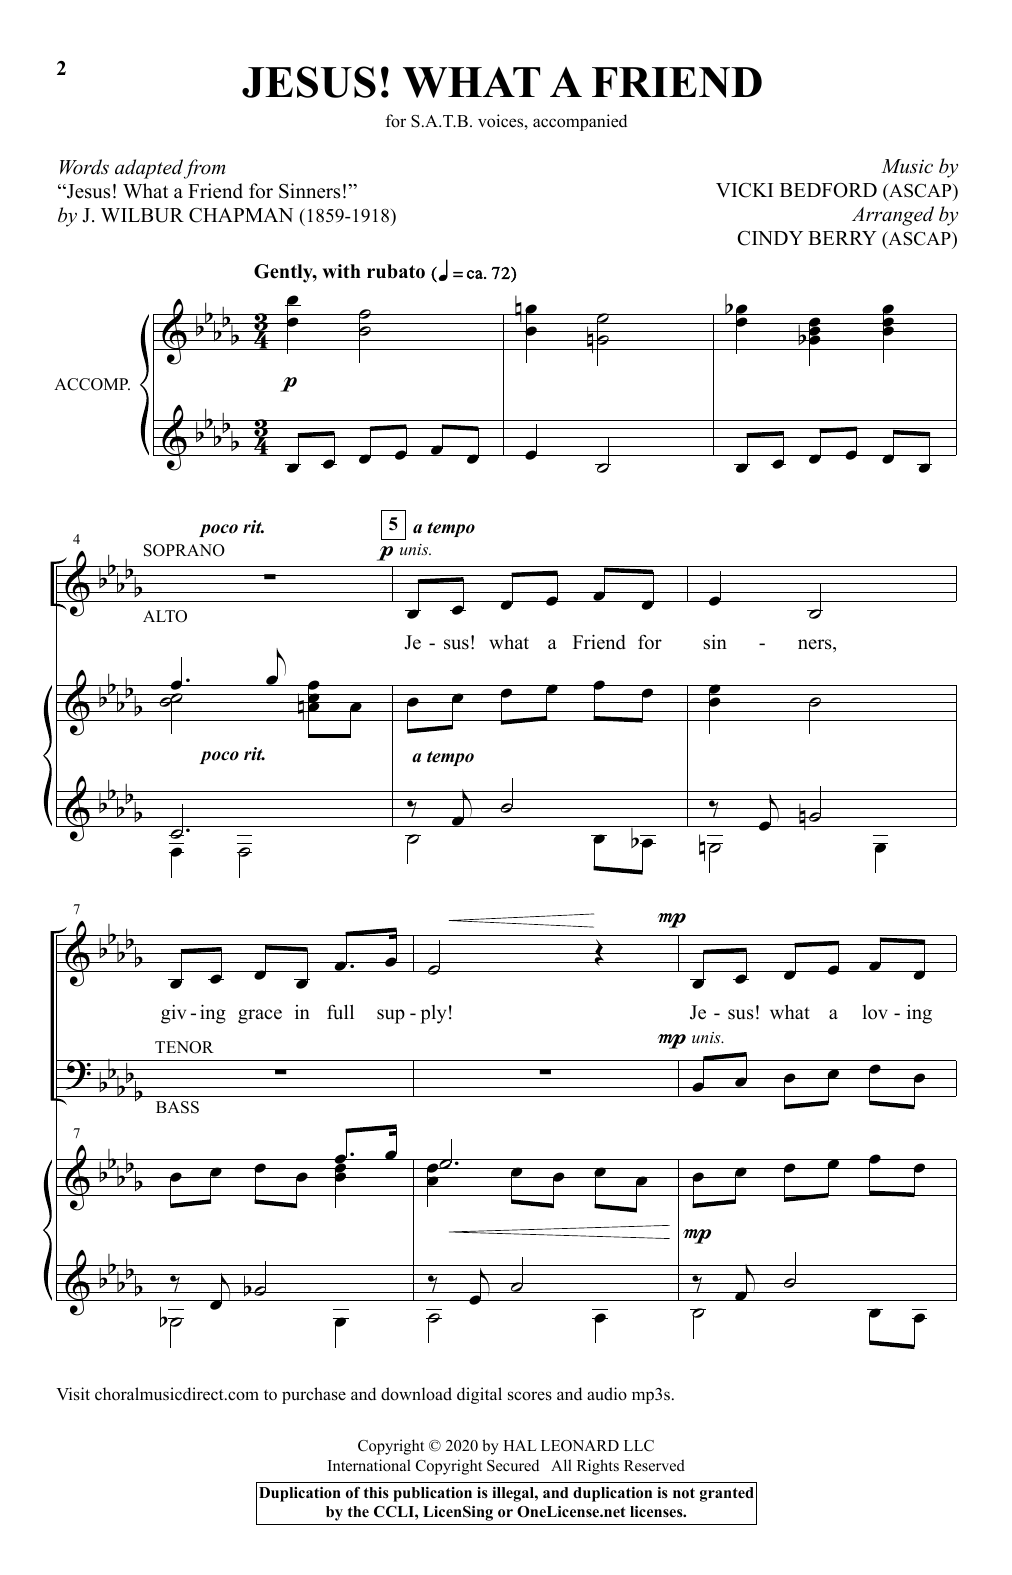 Download Vicki Bedford Jesus! What A Friend (arr. Cindy Berry) Sheet Music